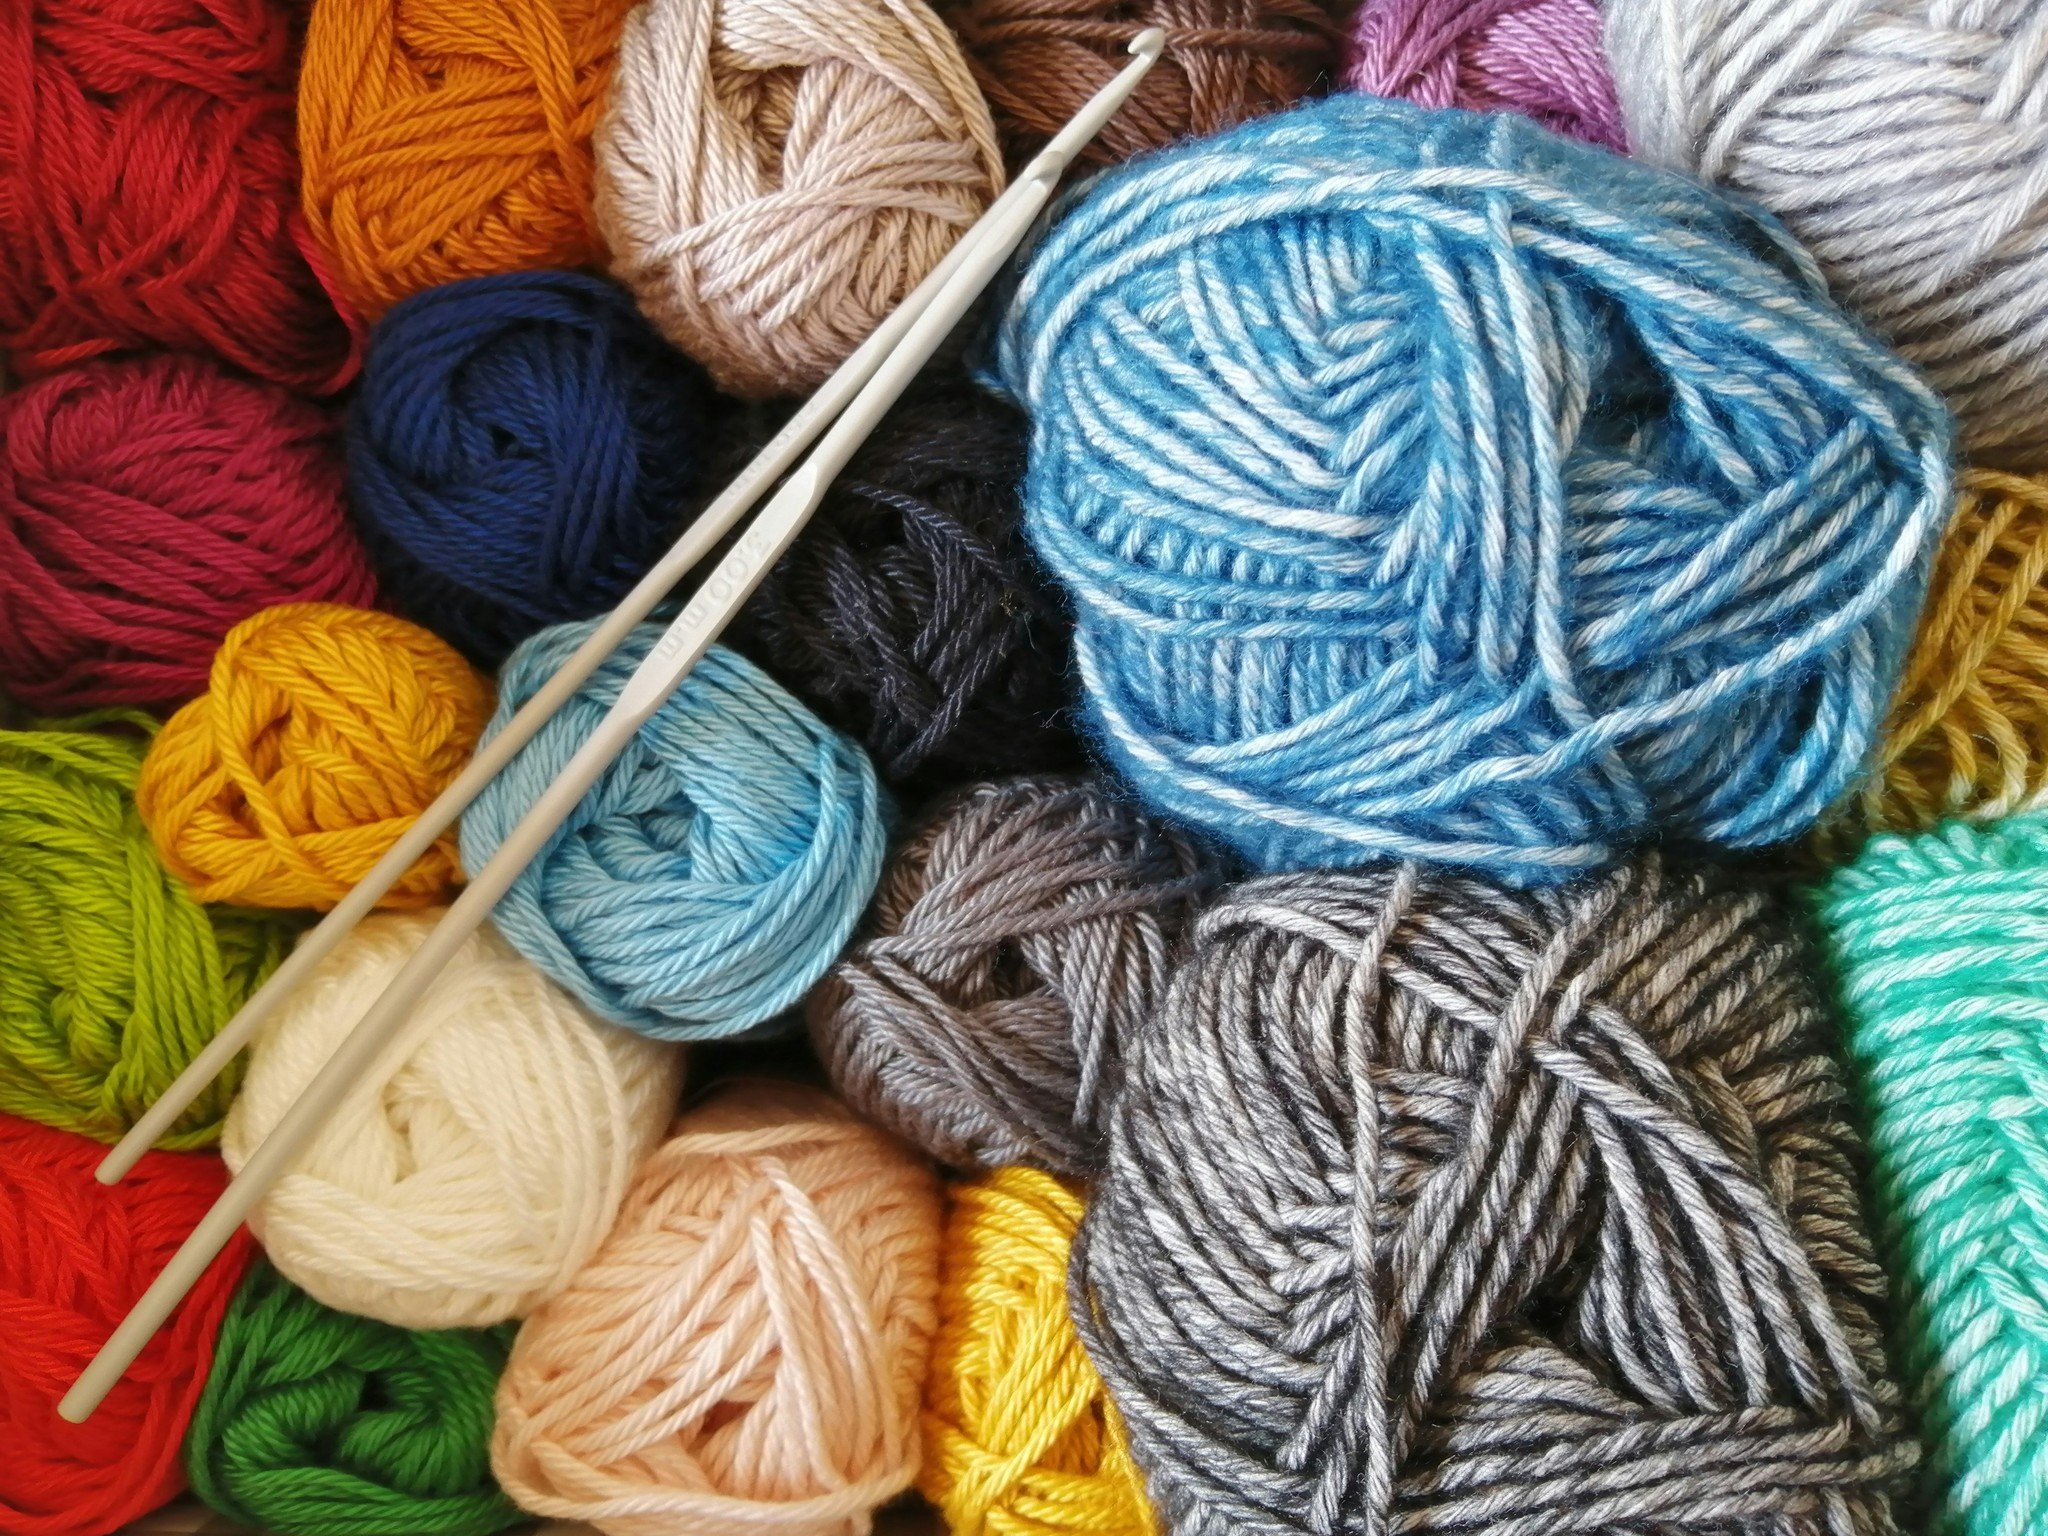 Got Yarn? Our Knit for Kids group met on their usual second Monday in April and did &quot;Spring Cleaning&quot; to weed out yarns that were not suitable for our World Vision and MOM's items. Now, we need to replenish our supply. If you have skeins/ba